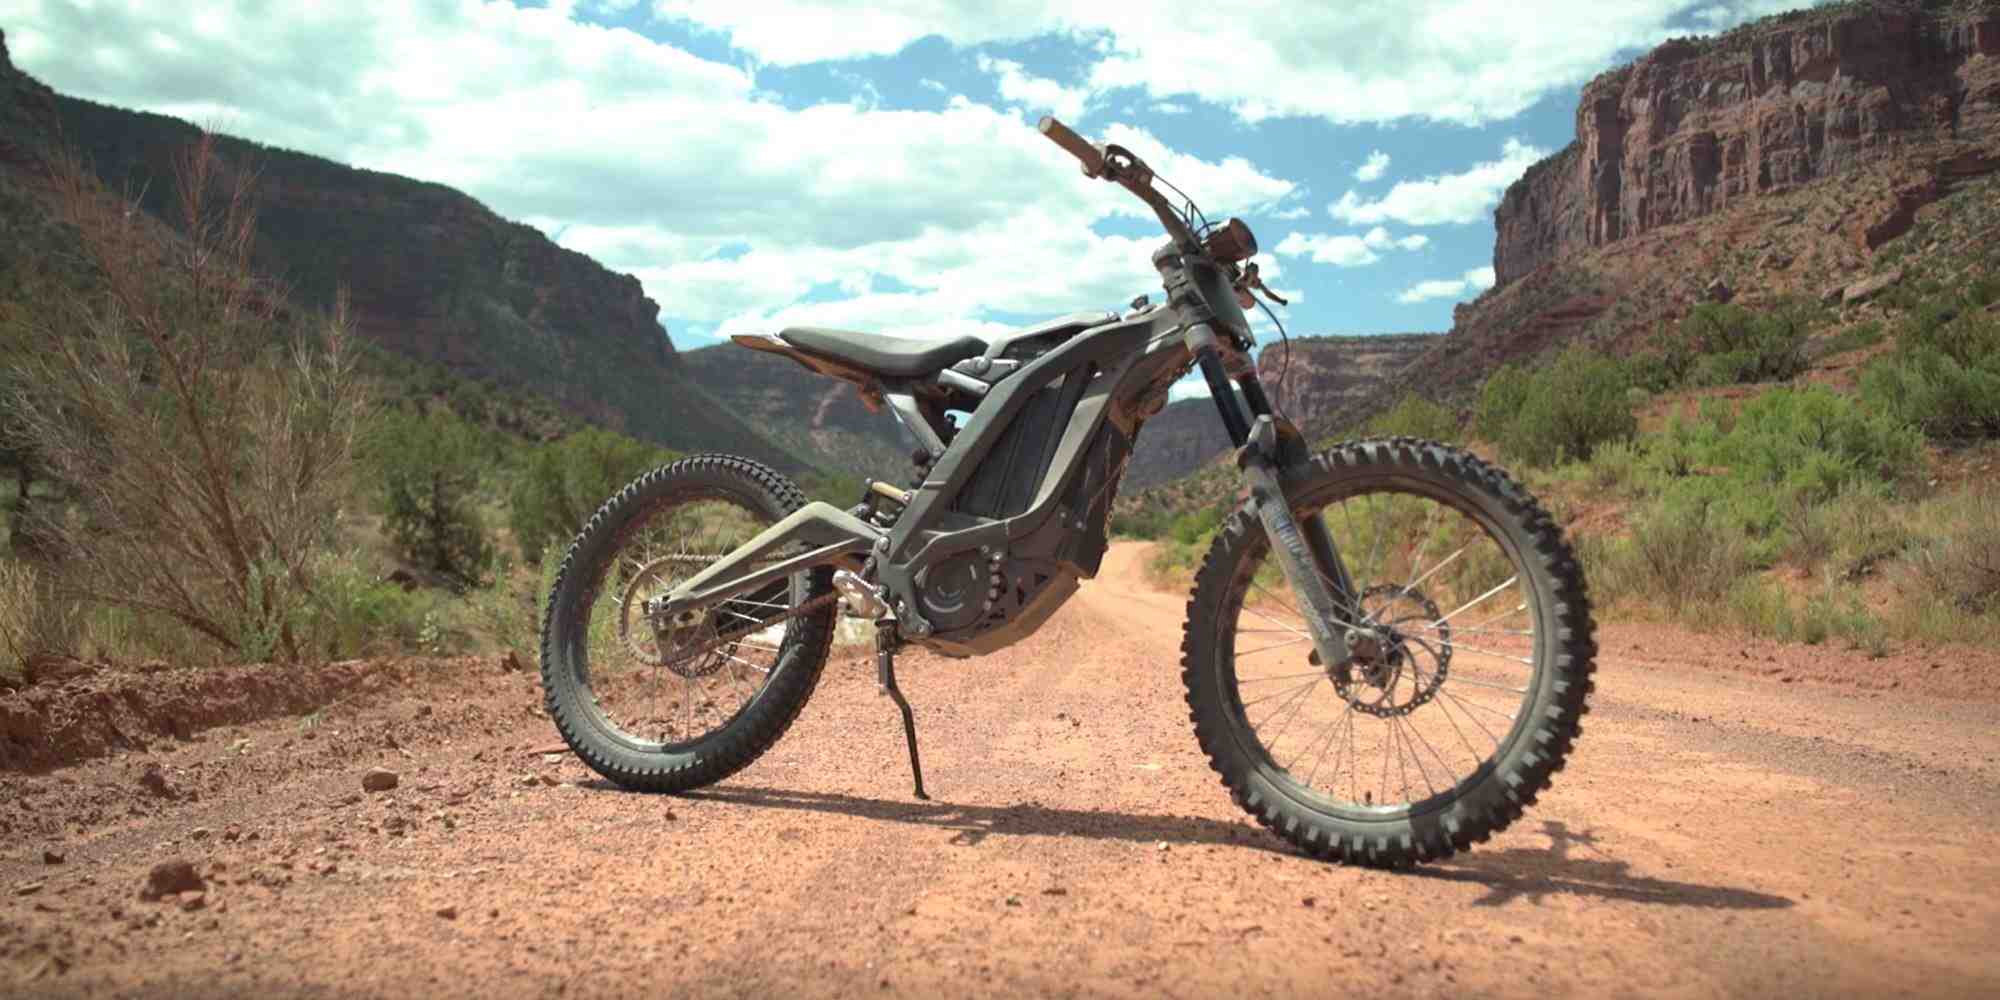 How fast is a sur Ron electric bike?